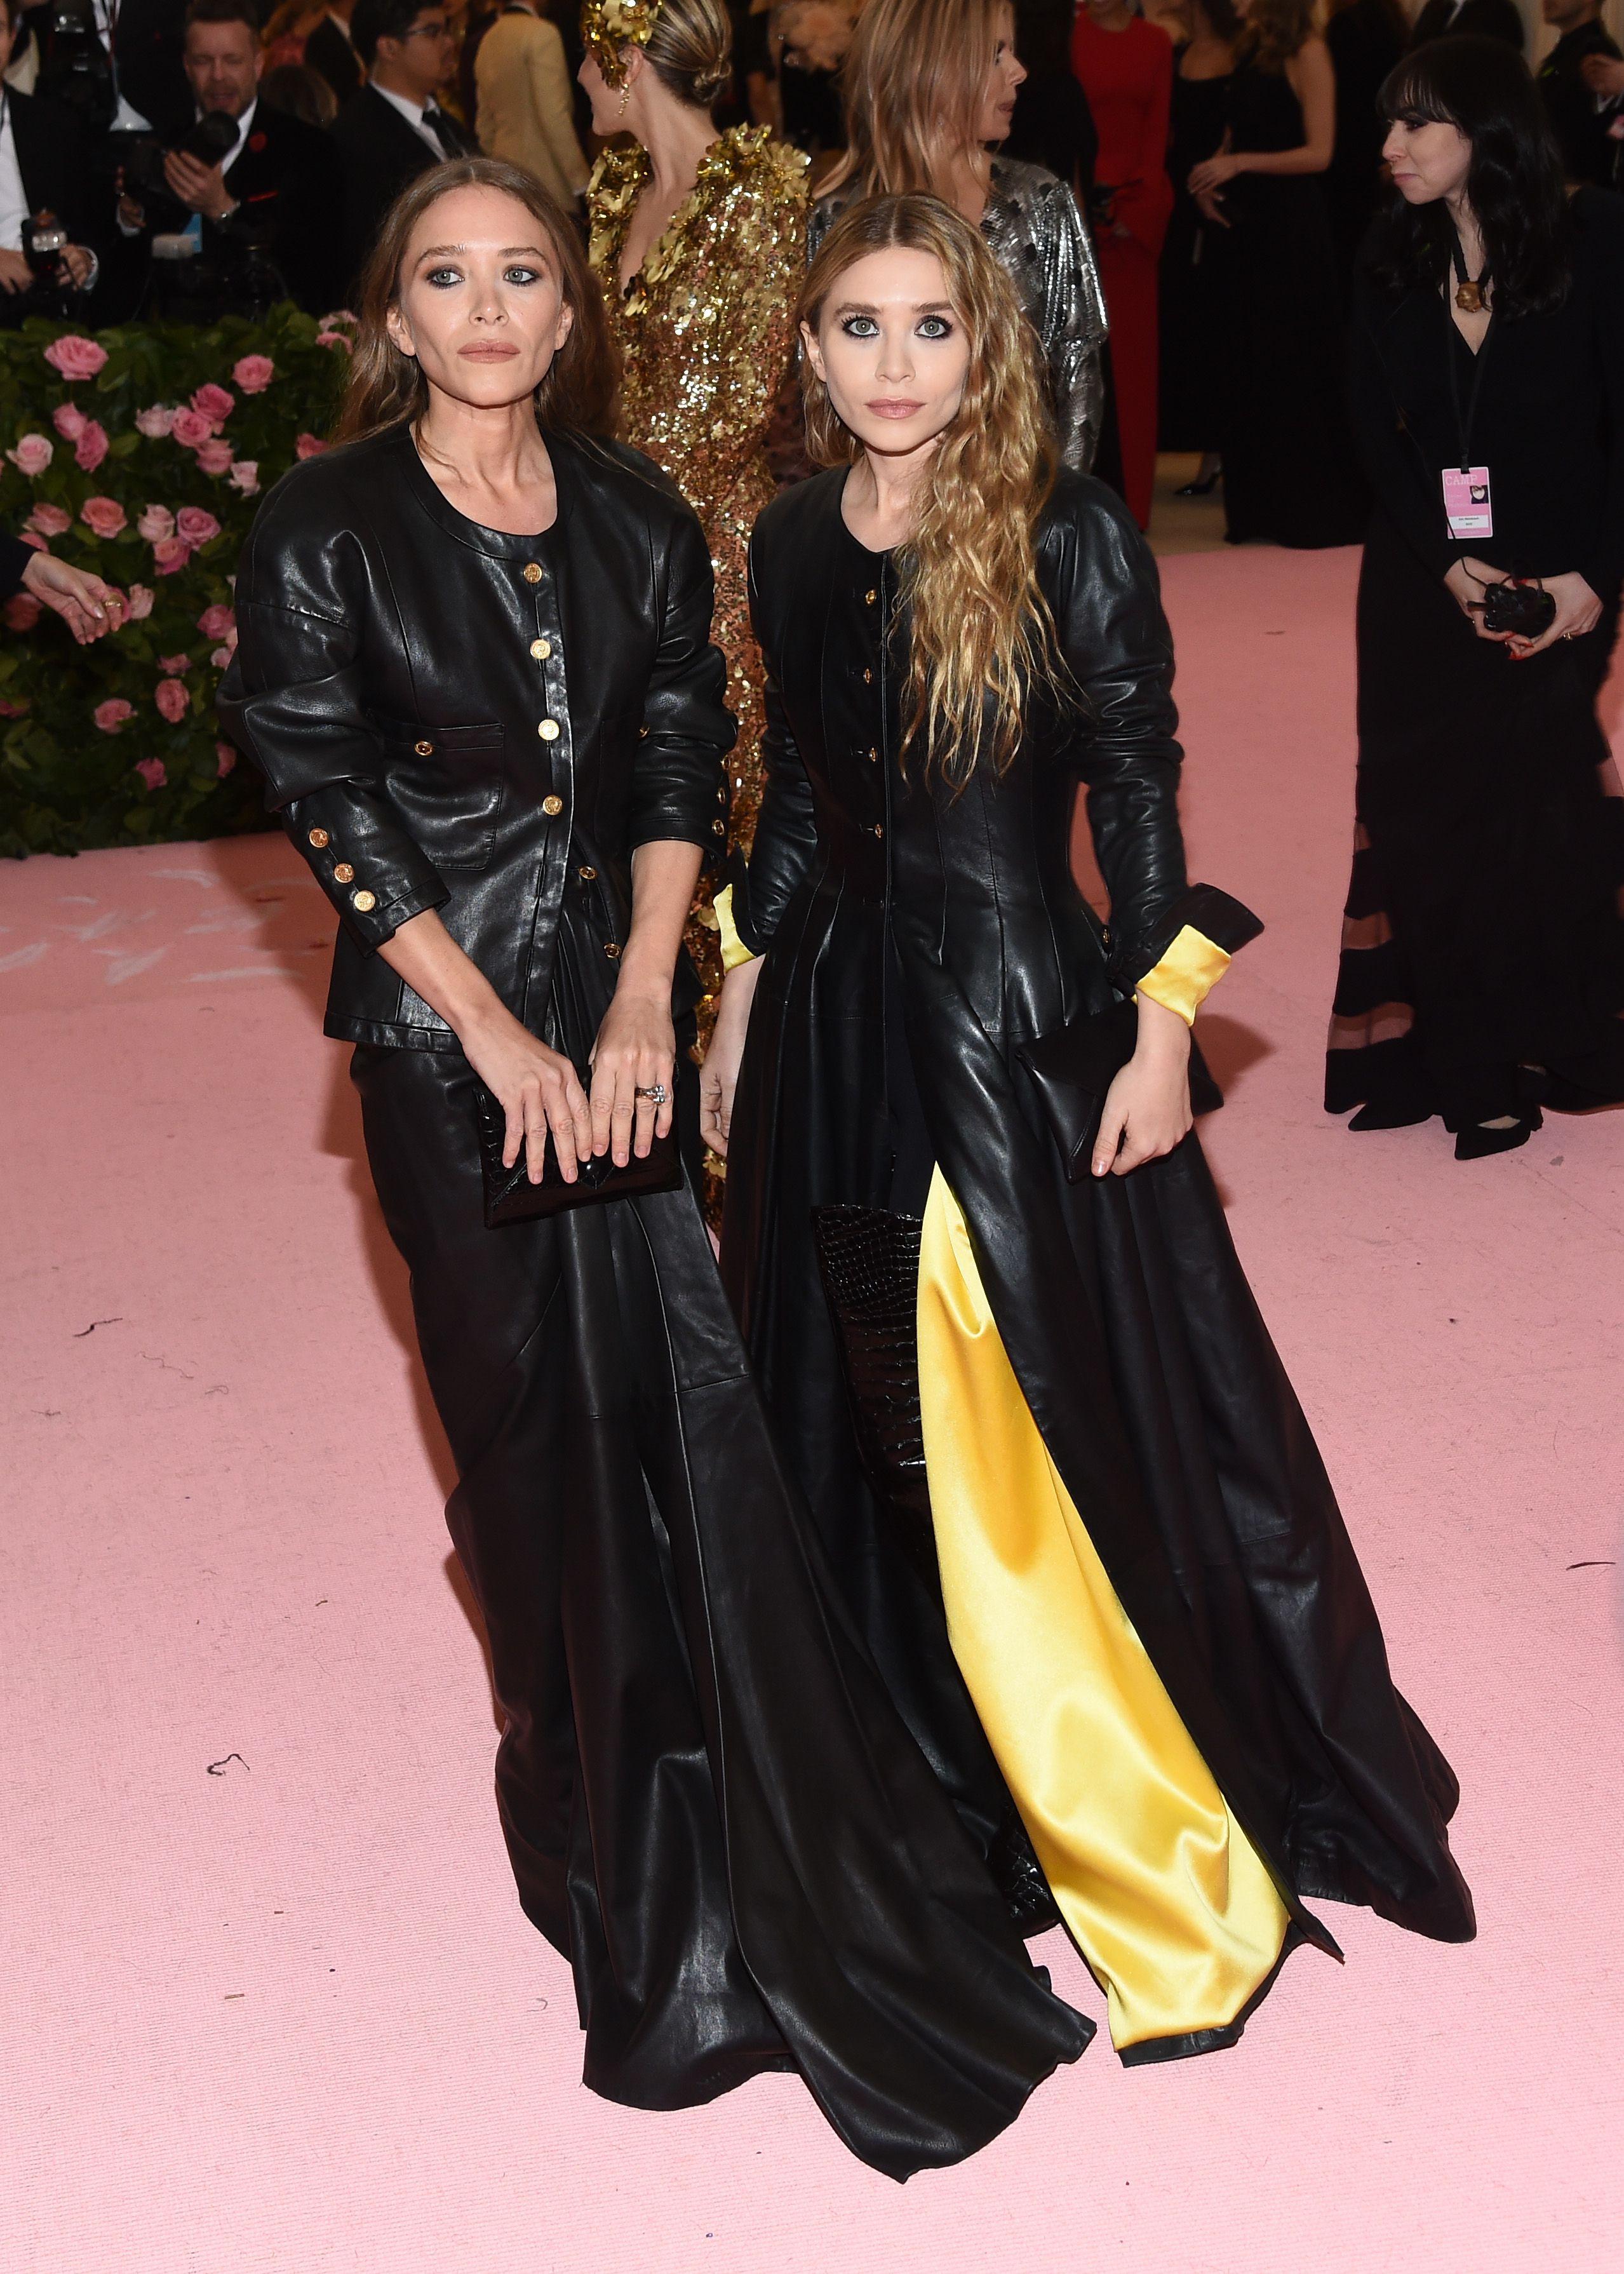 The twins stand together as photographers take their picture on the Met Gala red carpet. They're both wearing leather dresses with button detailing